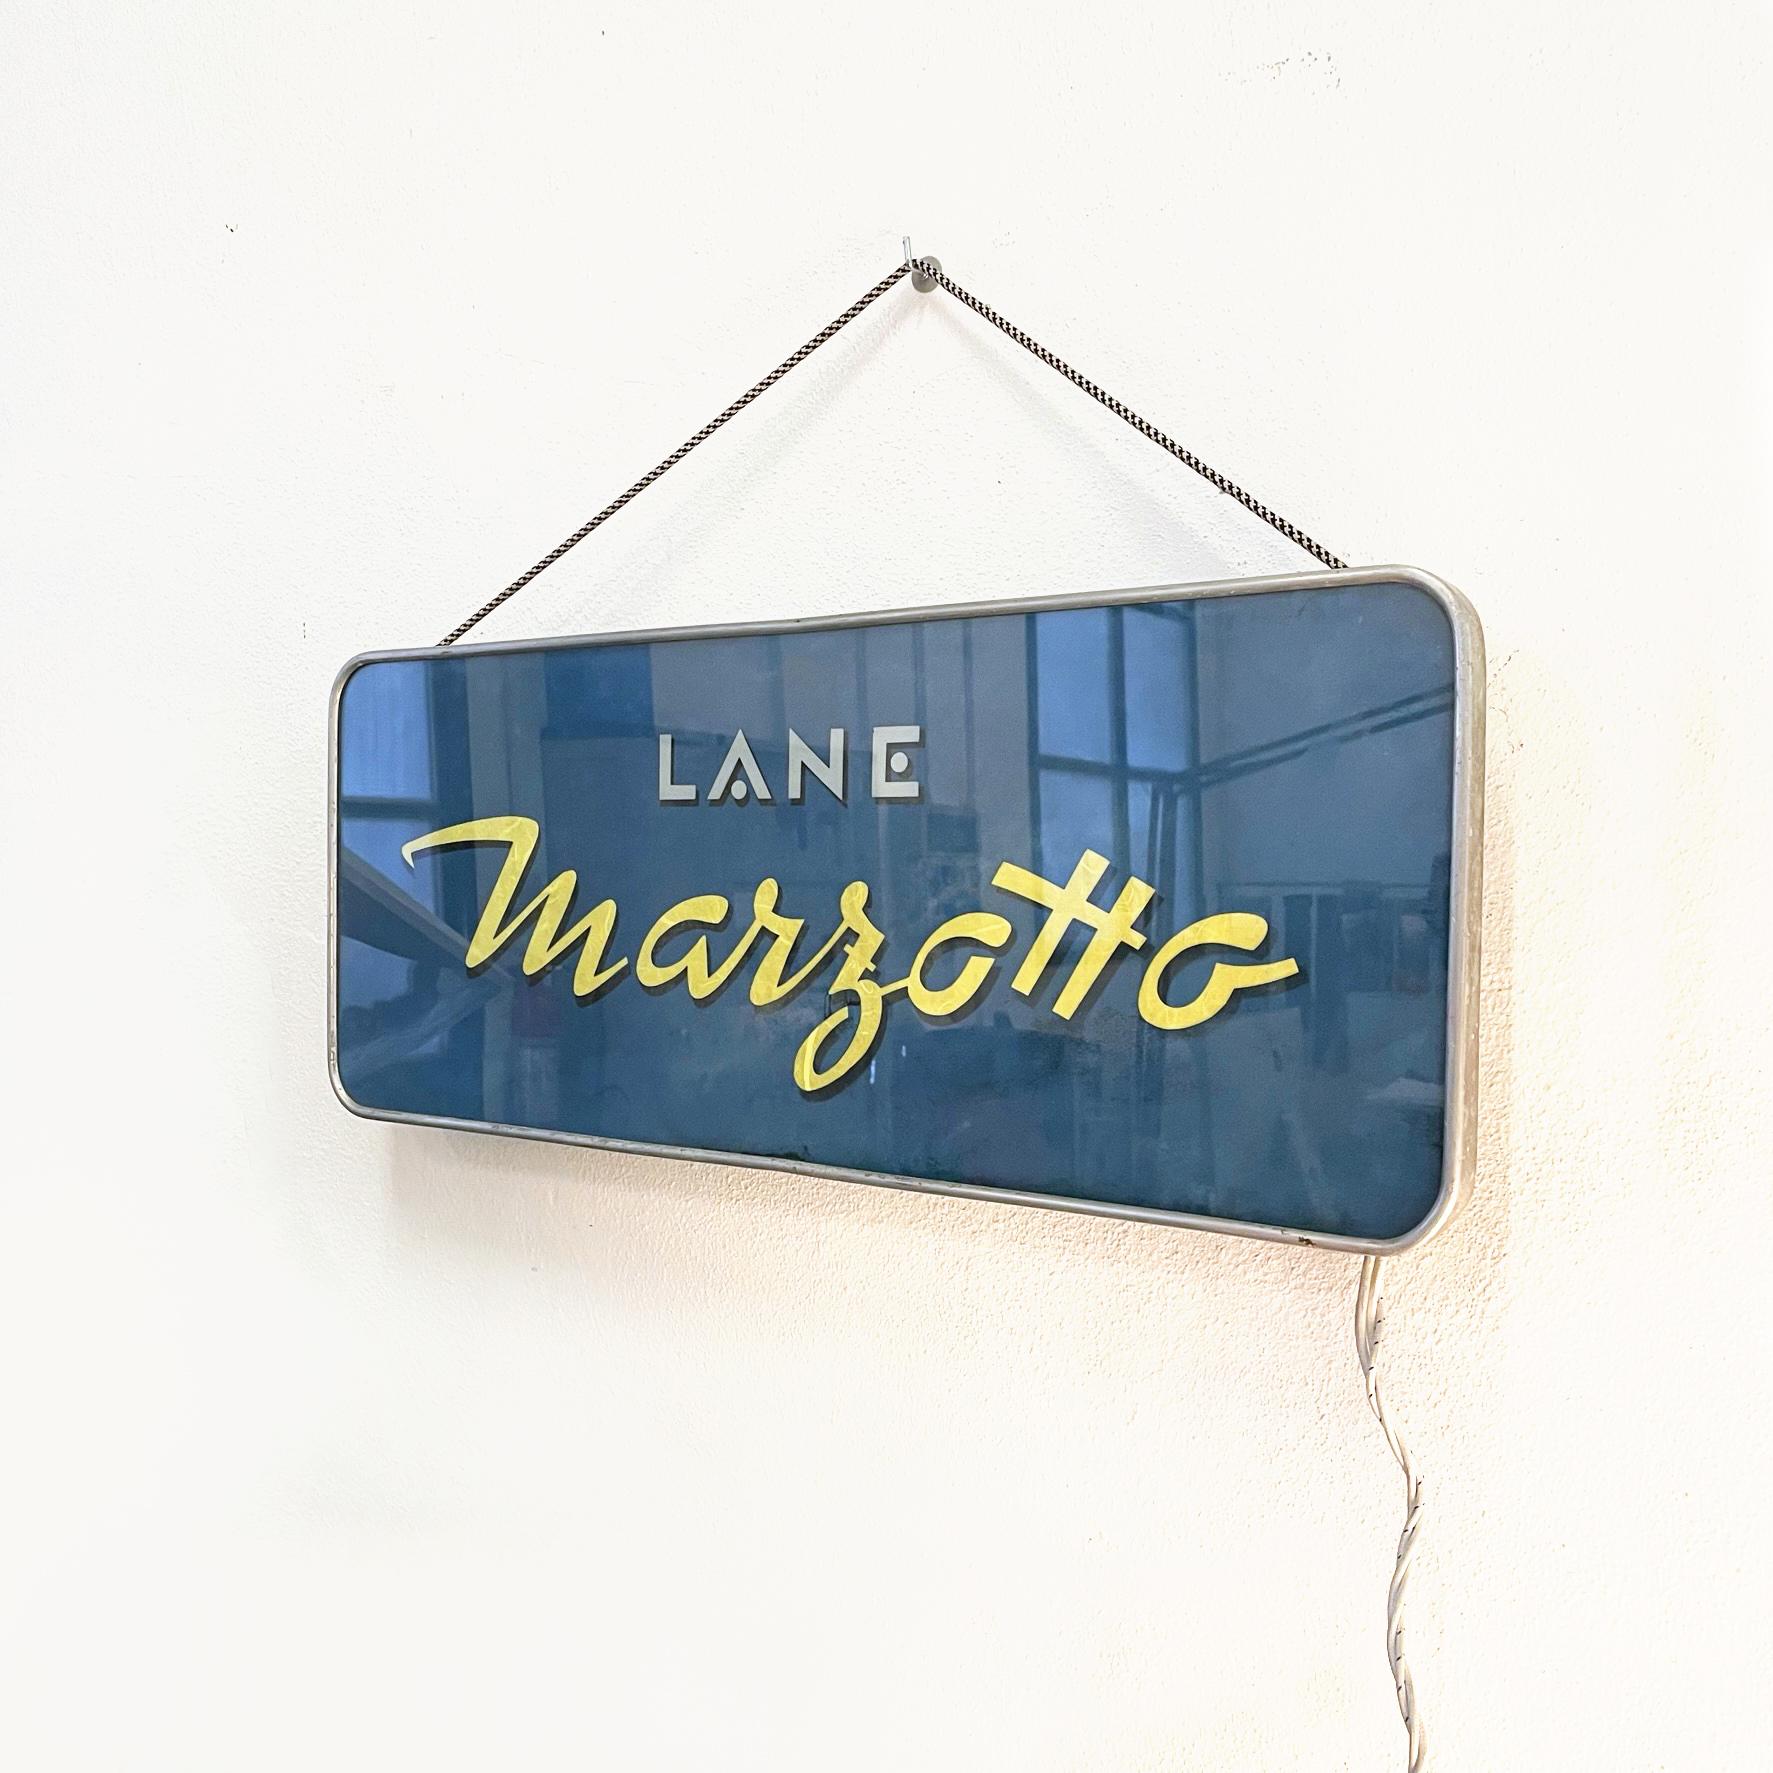 Italian modern Wall light sign by Lane Marzotto in plastic and metal, 1990s
Rectangular wall light sign with rounded corners. On the central plastic panel there is the writing Lane Marzotto in gray and yellow on a blue background, which is backlit.